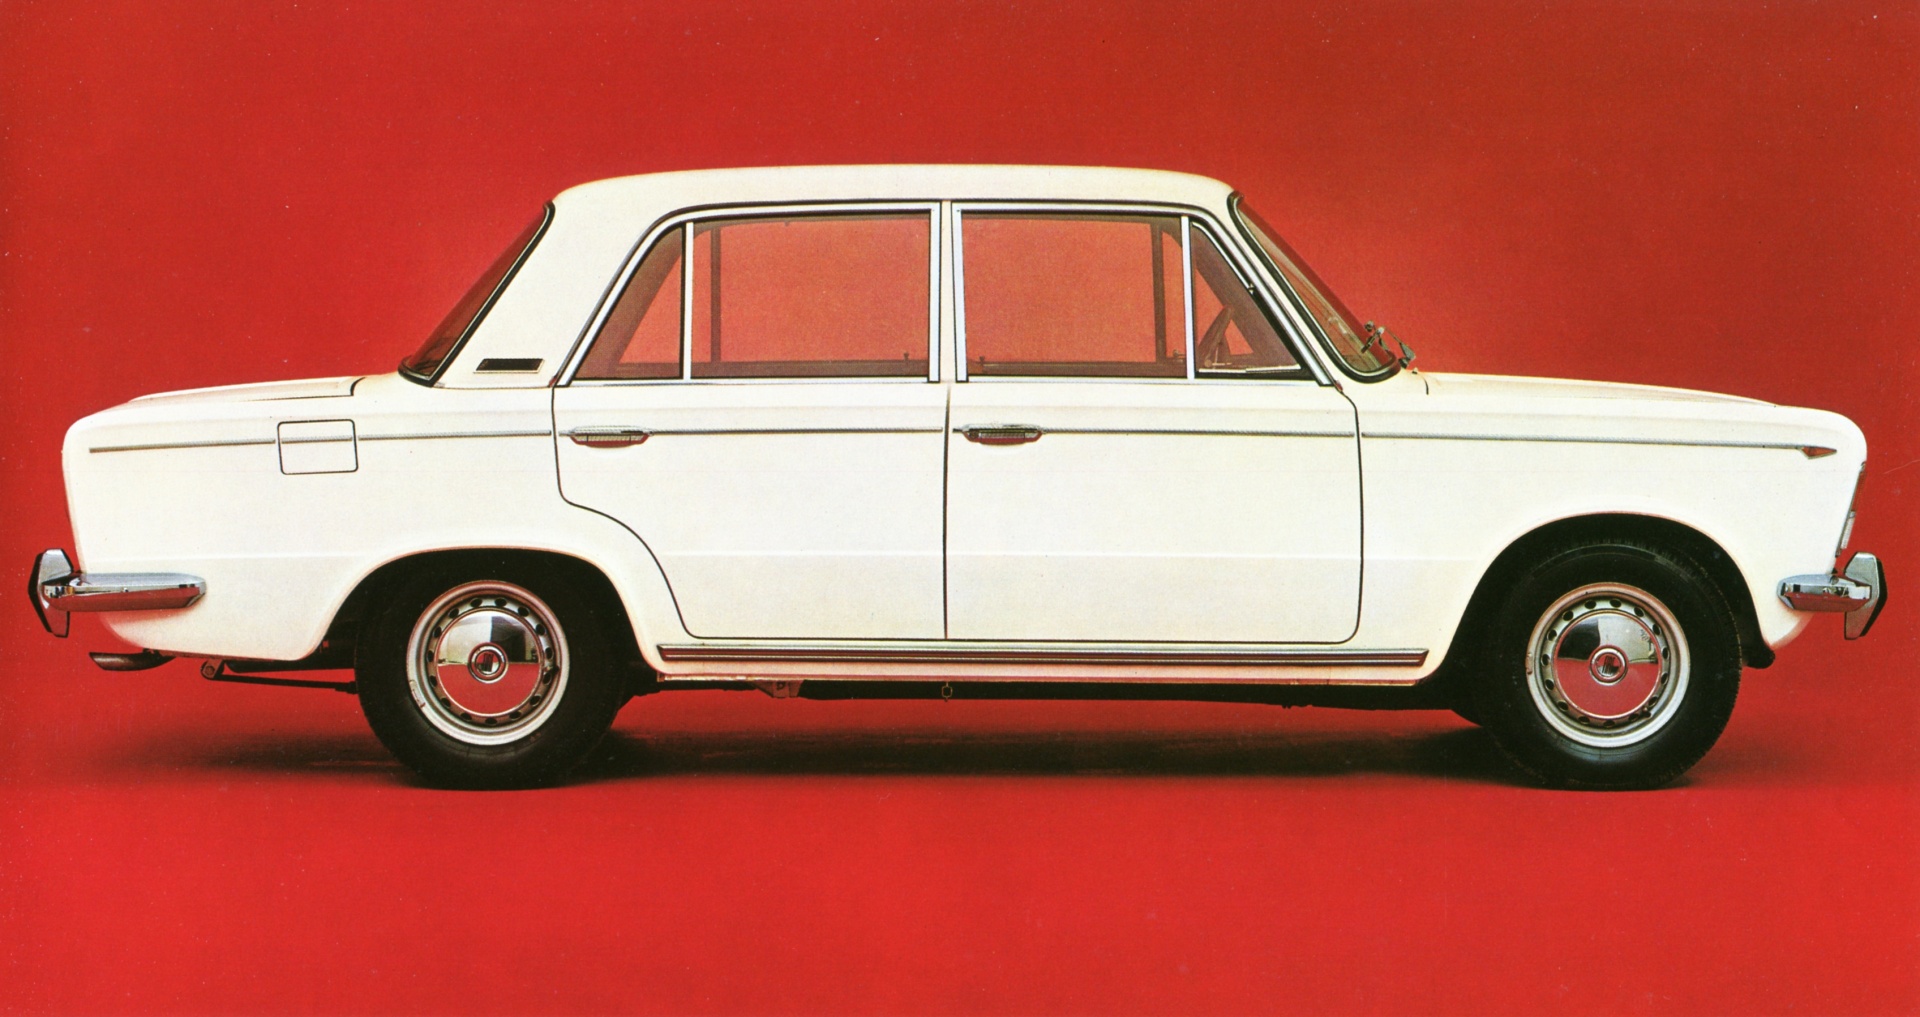 FIAT 125 side view